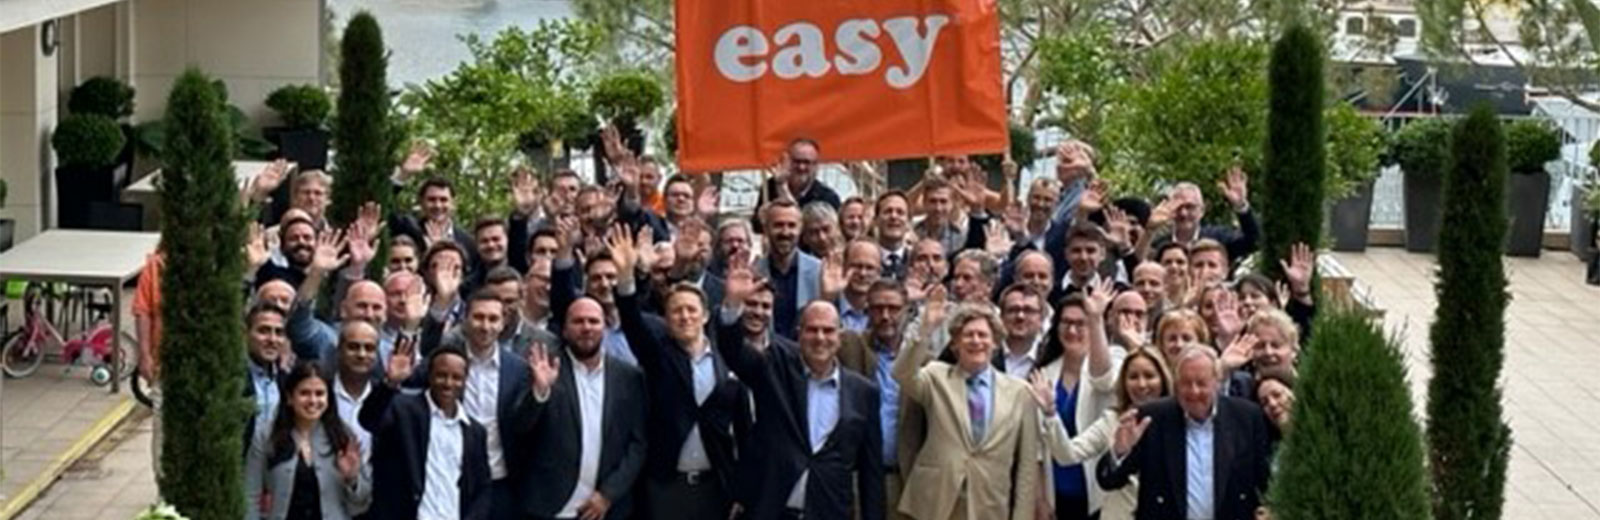 The 'easy' brand family gathers at Monaco for a networking weekend